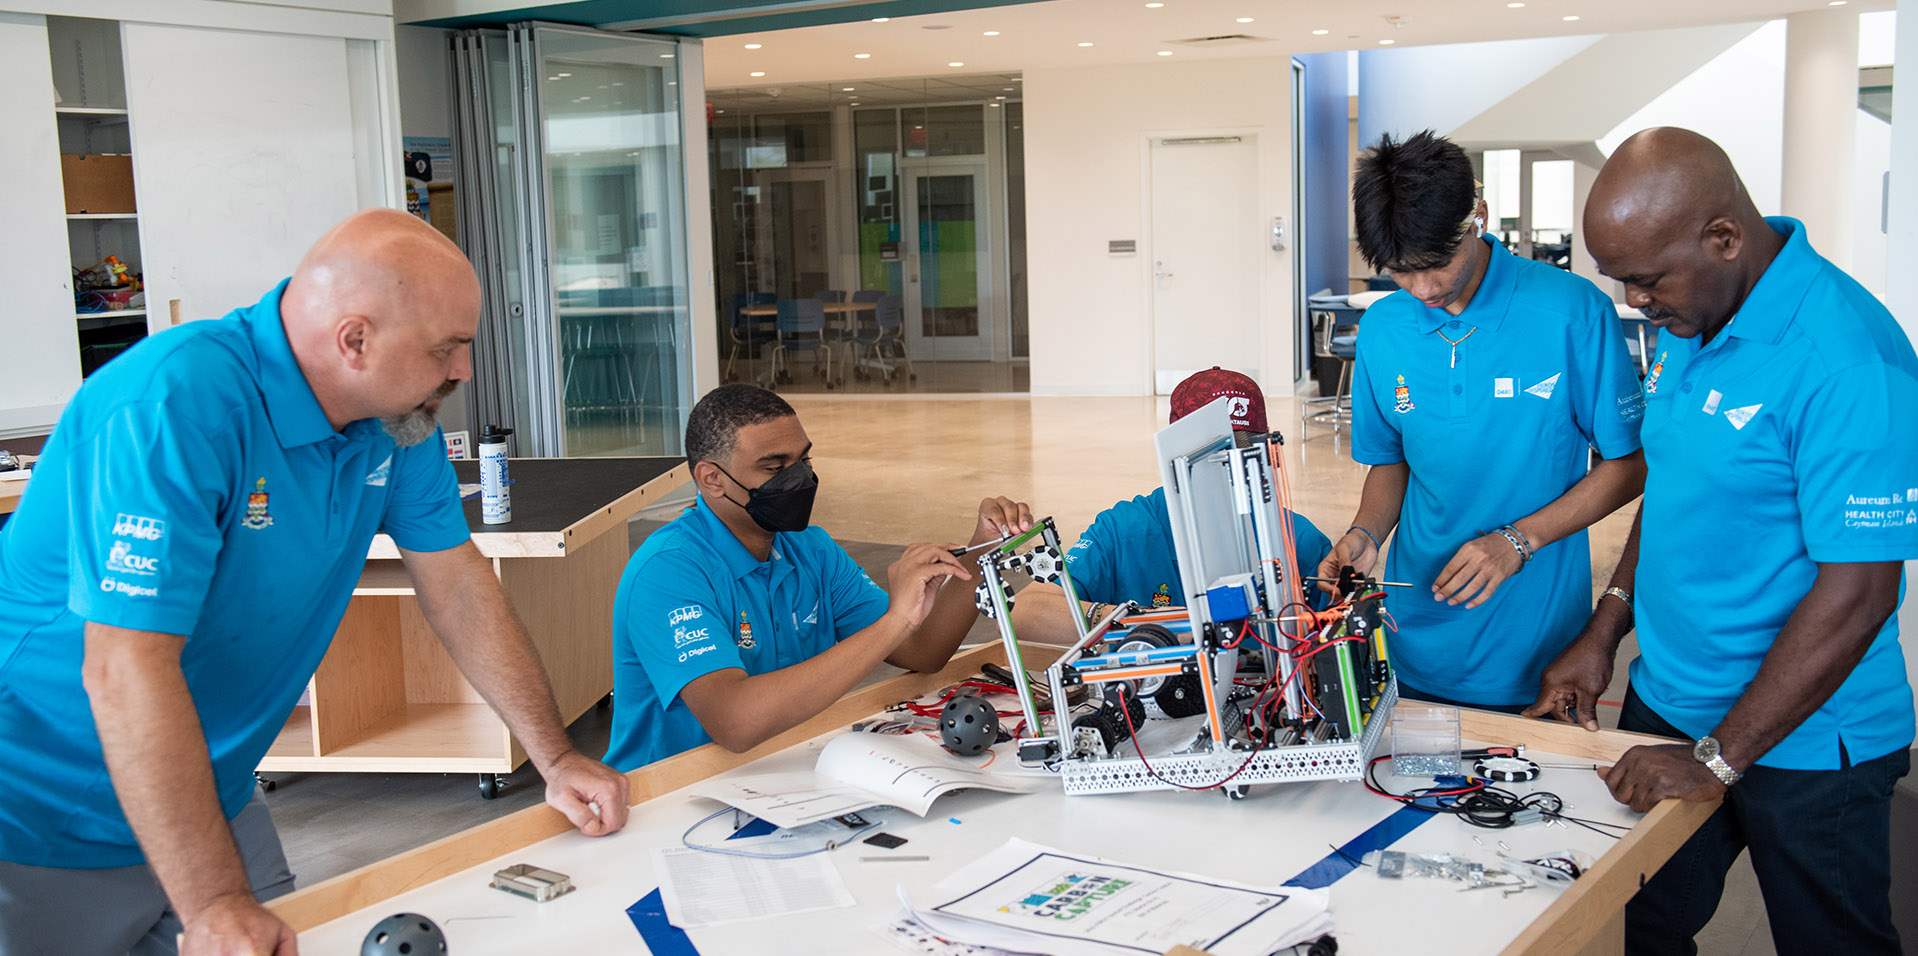 These STEM students spent their summers building robots and preparing to compete on the international stage at the FIRST Global Competition in Switzerland.